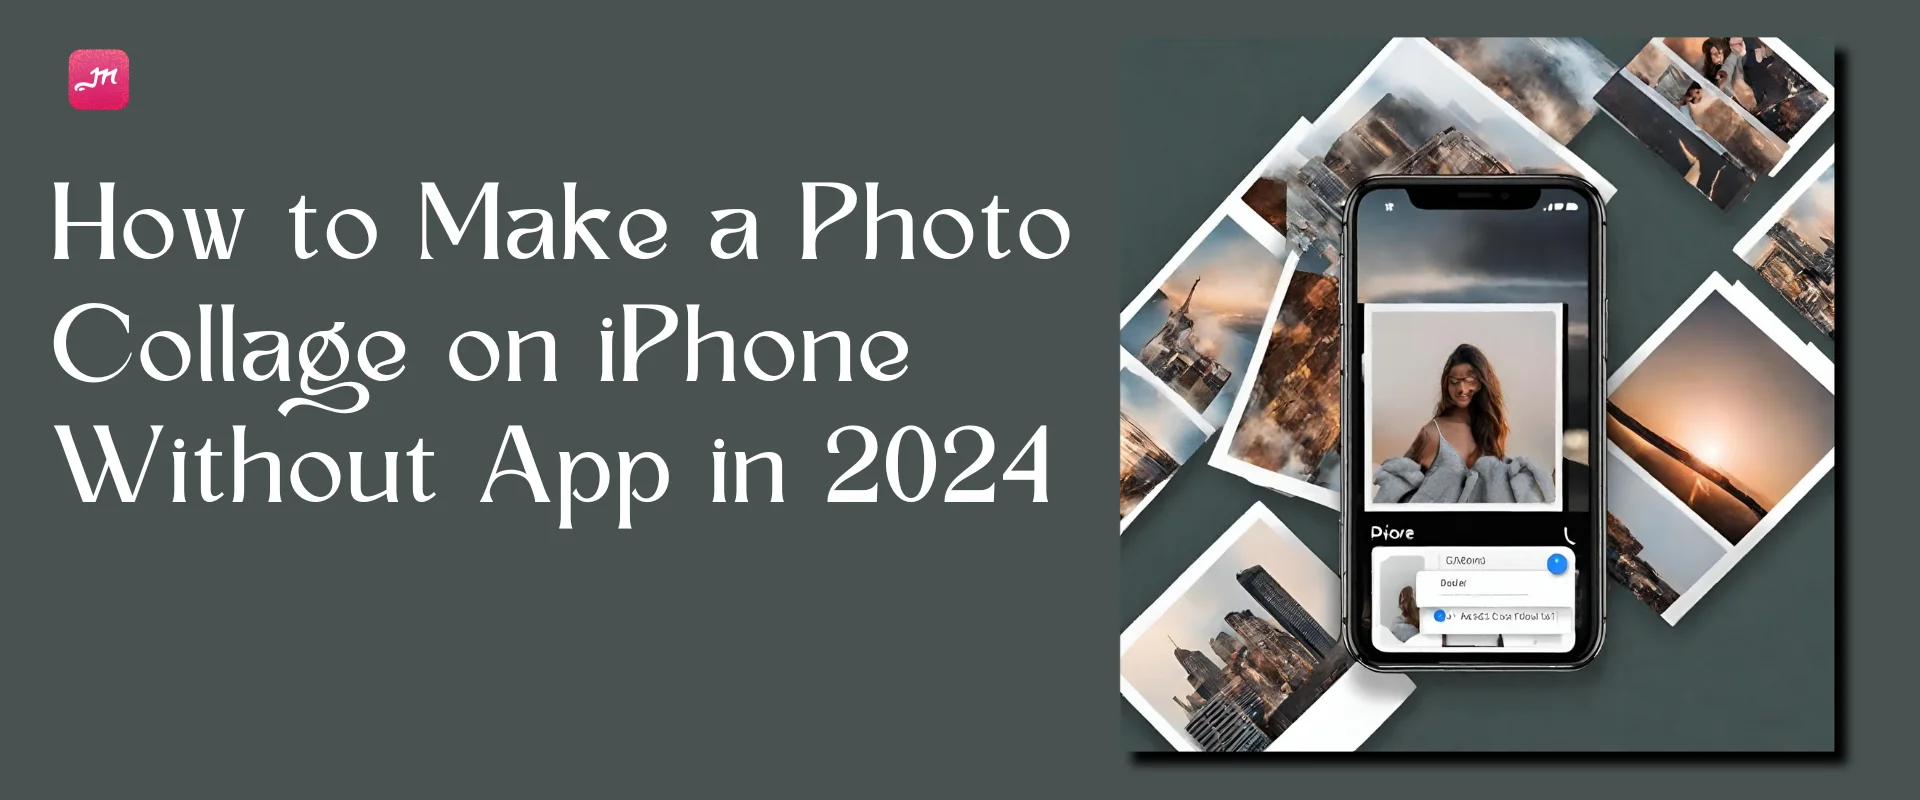 How to Make a Photo Collage on iPhone Without App in 2024